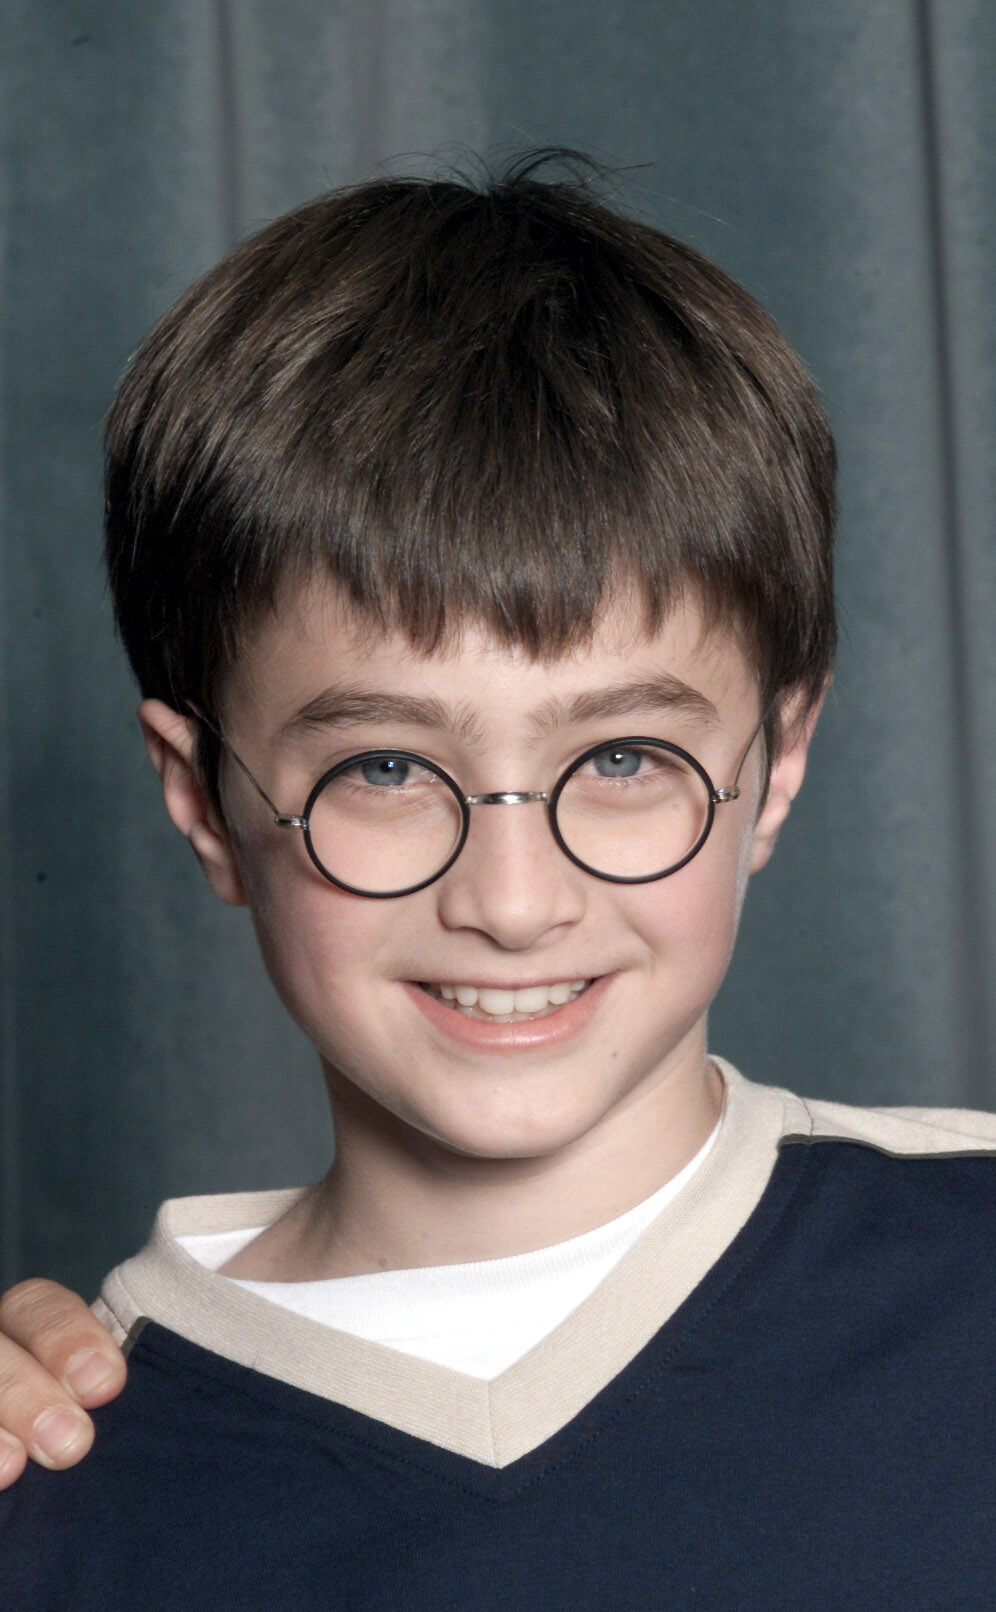 The boy at a press conference for the movie "Harry Potter and The Philosopher's Stone" in London on August 23, 2000 | Source: Getty Images